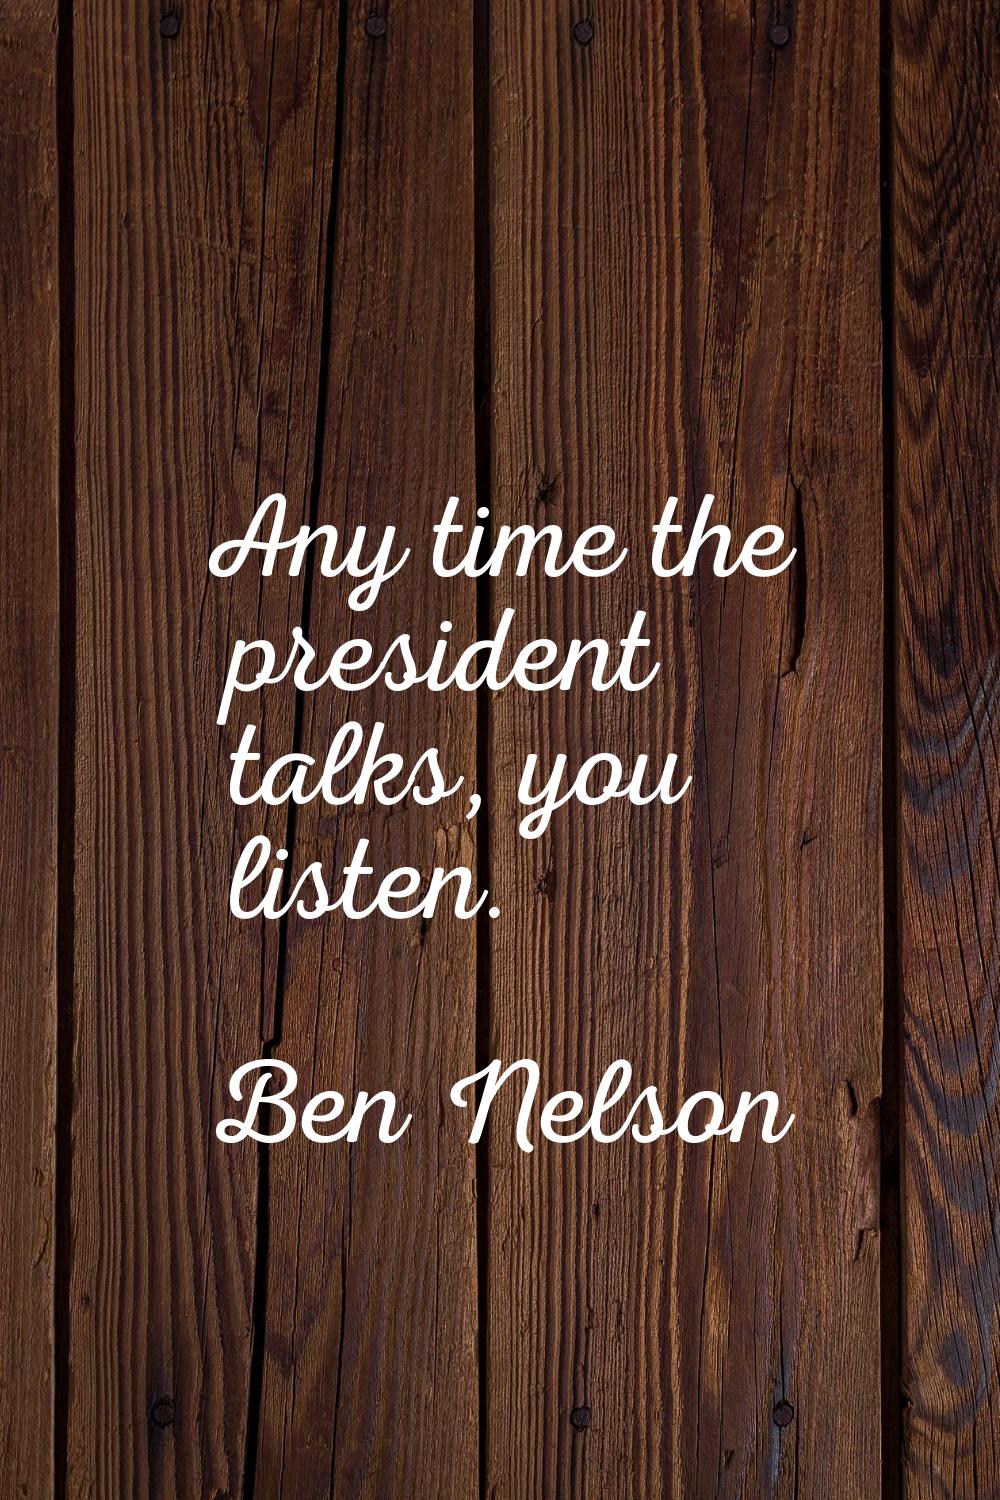 Any time the president talks, you listen.